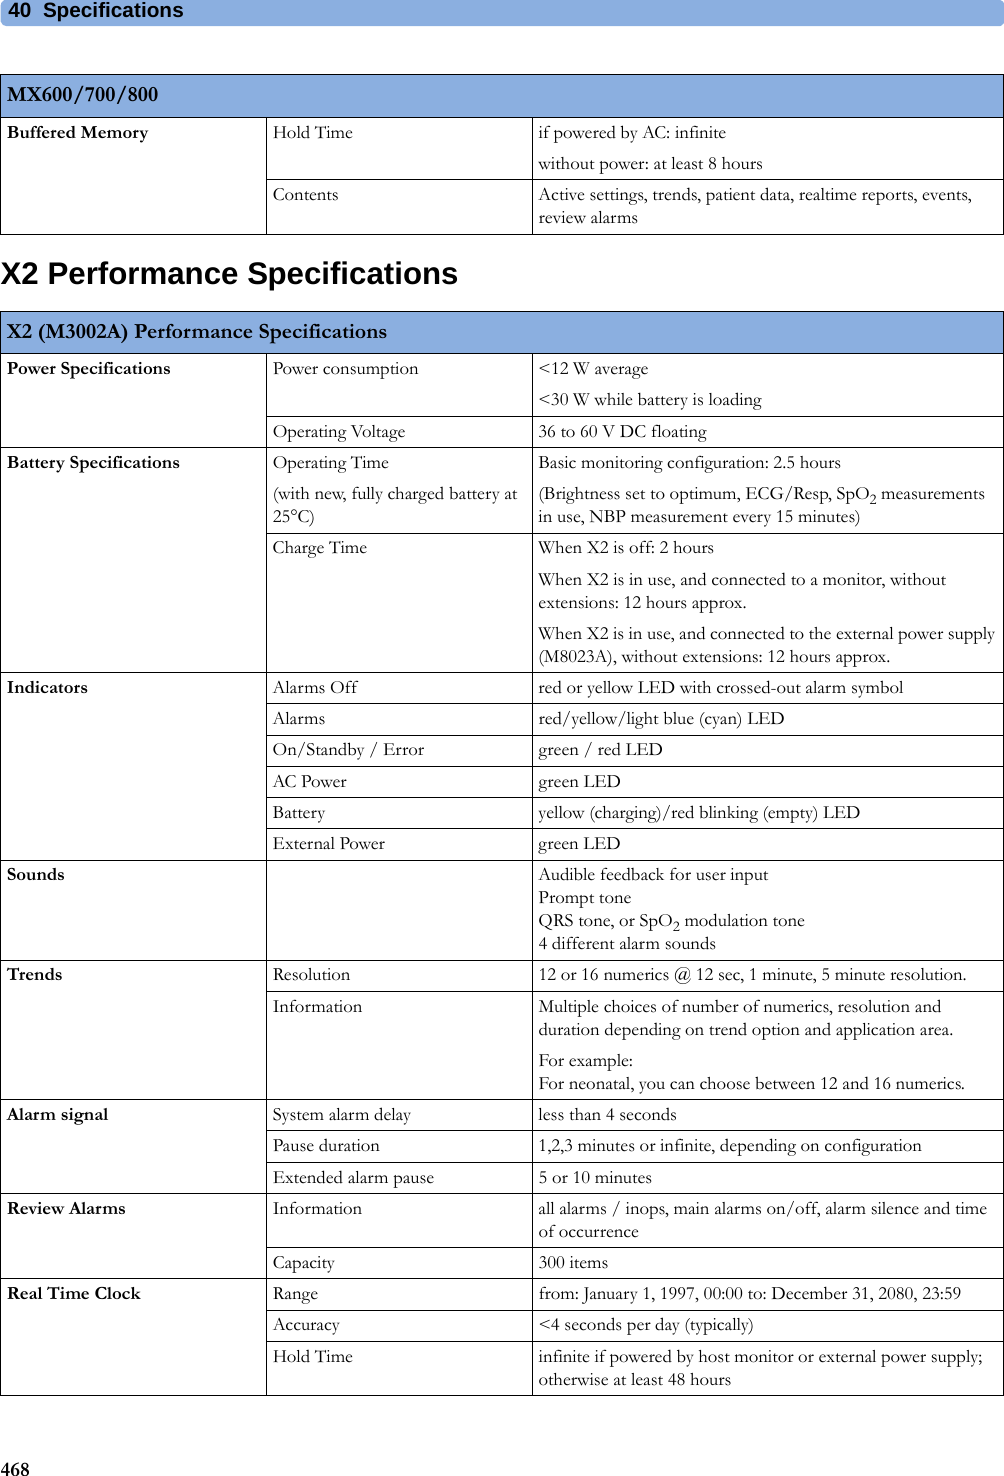 40 Specifications468X2 Performance SpecificationsBuffered Memory Hold Time if powered by AC: infinitewithout power: at least 8 hours Contents Active settings, trends, patient data, realtime reports, events, review alarmsMX600/700/800X2 (M3002A) Performance SpecificationsPower Specifications Power consumption &lt;12 W average&lt;30 W while battery is loadingOperating Voltage 36 to 60 V DC floatingBattery Specifications Operating Time(with new, fully charged battery at 25°C)Basic monitoring configuration: 2.5 hours(Brightness set to optimum, ECG/Resp, SpO2 measurements in use, NBP measurement every 15 minutes)Charge Time When X2 is off: 2 hoursWhen X2 is in use, and connected to a monitor, without extensions: 12 hours approx.When X2 is in use, and connected to the external power supply (M8023A), without extensions: 12 hours approx.Indicators Alarms Off red or yellow LED with crossed-out alarm symbolAlarms red/yellow/light blue (cyan) LEDOn/Standby / Error green / red LEDAC Power green LEDBattery yellow (charging)/red blinking (empty) LEDExternal Power green LEDSounds Audible feedback for user inputPrompt toneQRS tone, or SpO2 modulation tone4 different alarm soundsTrends Resolution 12 or 16 numerics @ 12 sec, 1 minute, 5 minute resolution.Information Multiple choices of number of numerics, resolution and duration depending on trend option and application area.For example:For neonatal, you can choose between 12 and 16 numerics.Alarm signal System alarm delay less than 4 secondsPause duration 1,2,3 minutes or infinite, depending on configurationExtended alarm pause 5 or 10 minutesReview Alarms Information all alarms / inops, main alarms on/off, alarm silence and time of occurrenceCapacity 300 itemsReal Time Clock Range from: January 1, 1997, 00:00 to: December 31, 2080, 23:59Accuracy &lt;4 seconds per day (typically)Hold Time infinite if powered by host monitor or external power supply; otherwise at least 48 hours